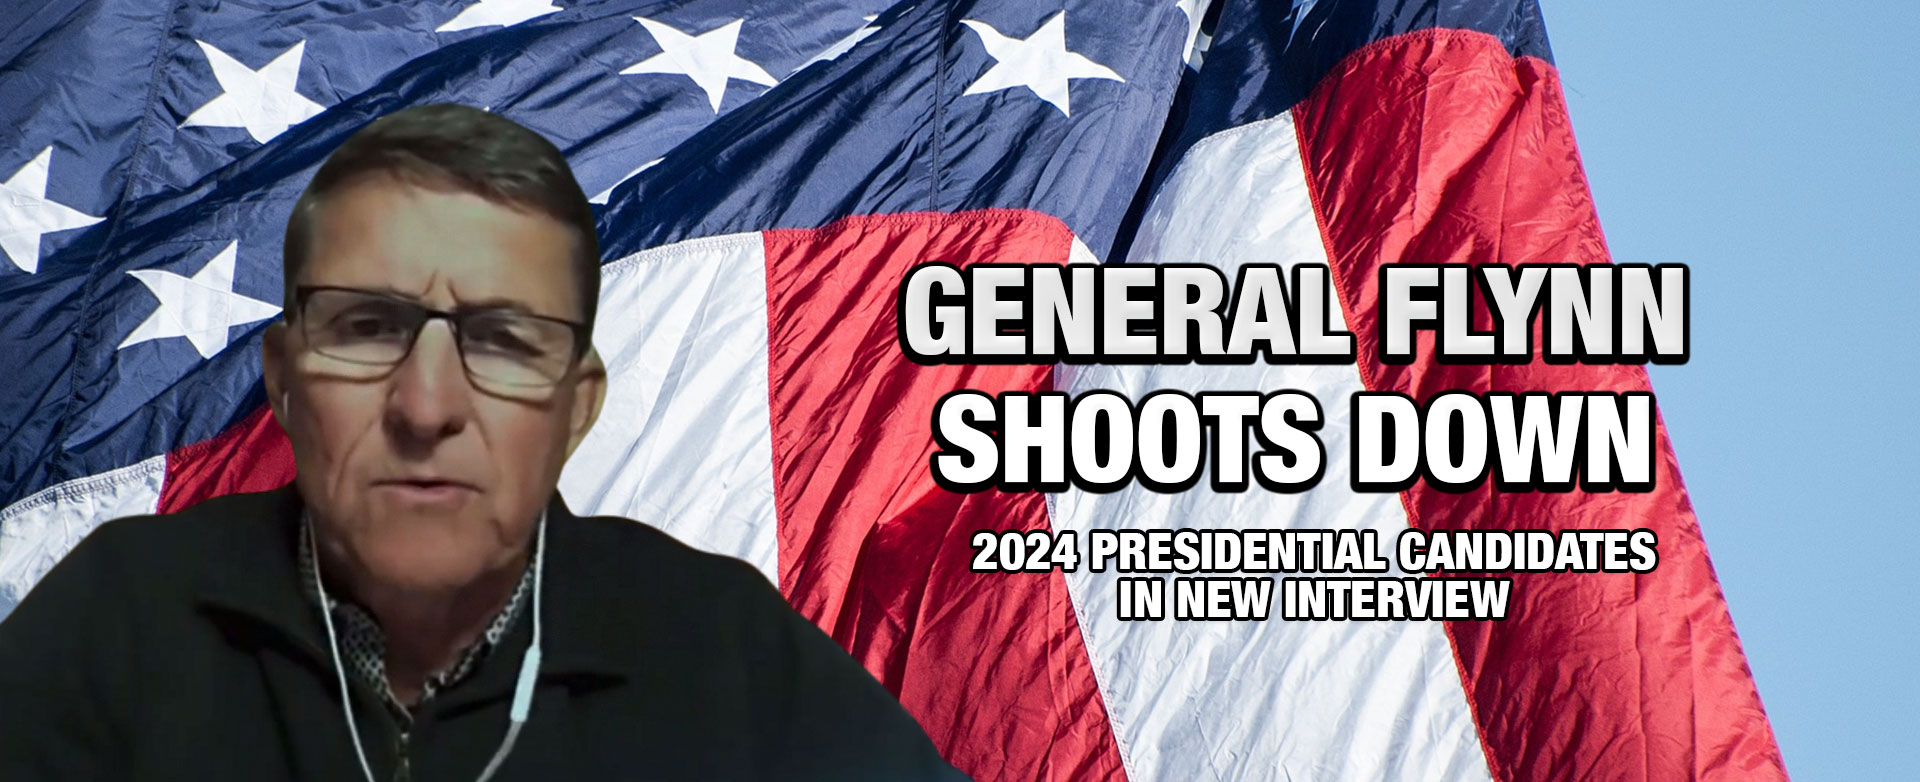 MyPatriotsNetwork-General Flynn Shoots Down 2024 Presidential Candidates In New Interview